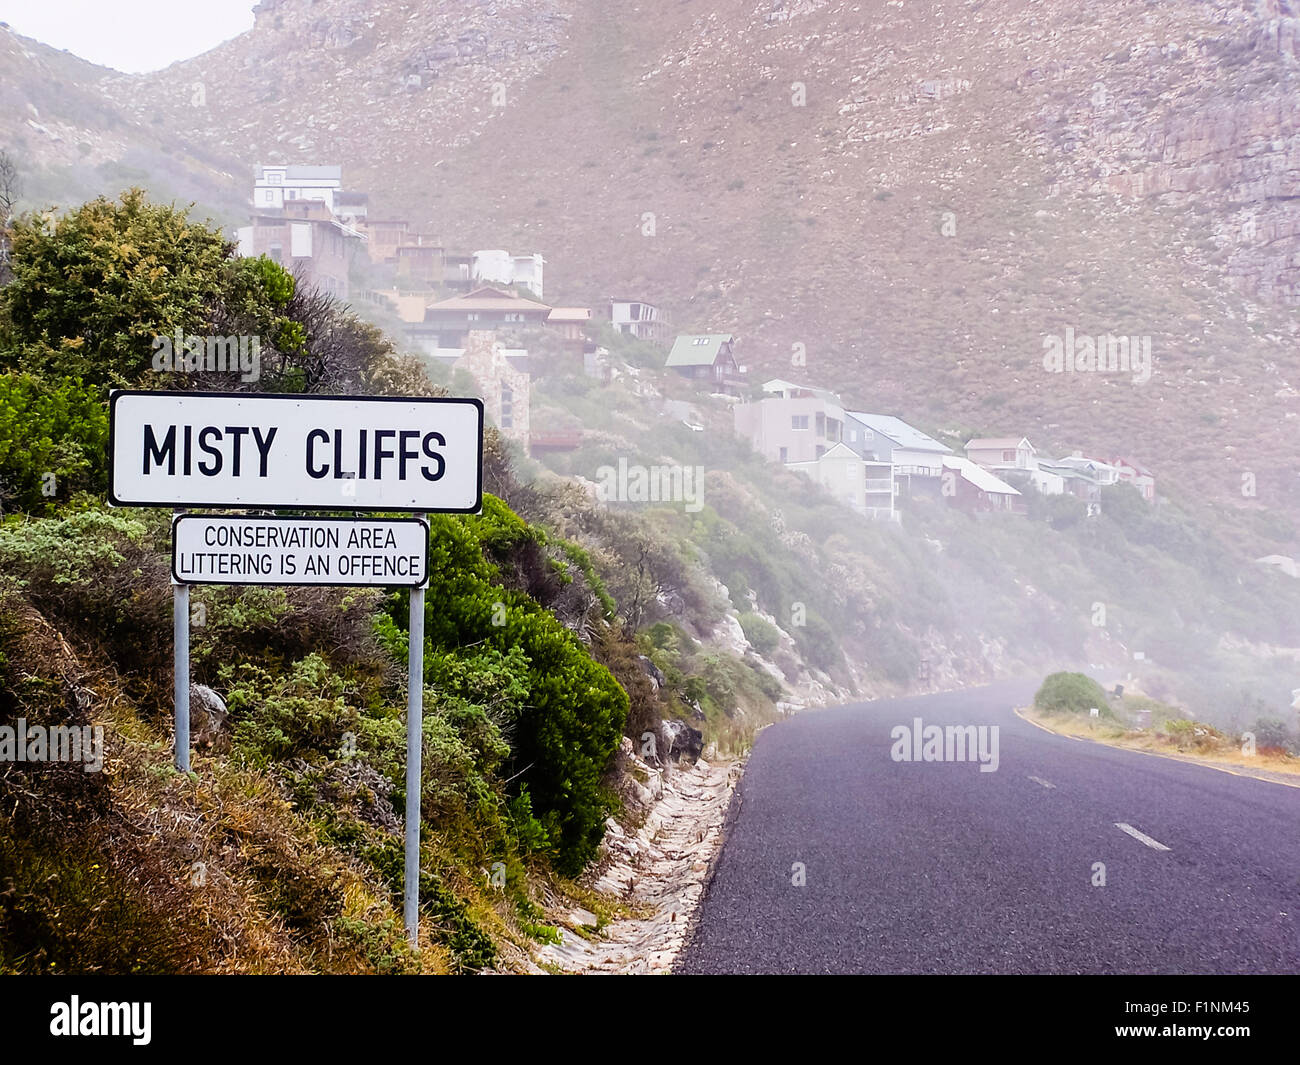 Misty Cliffs, a small village in South Africa, along the Cape of Good Hope. Stock Photo